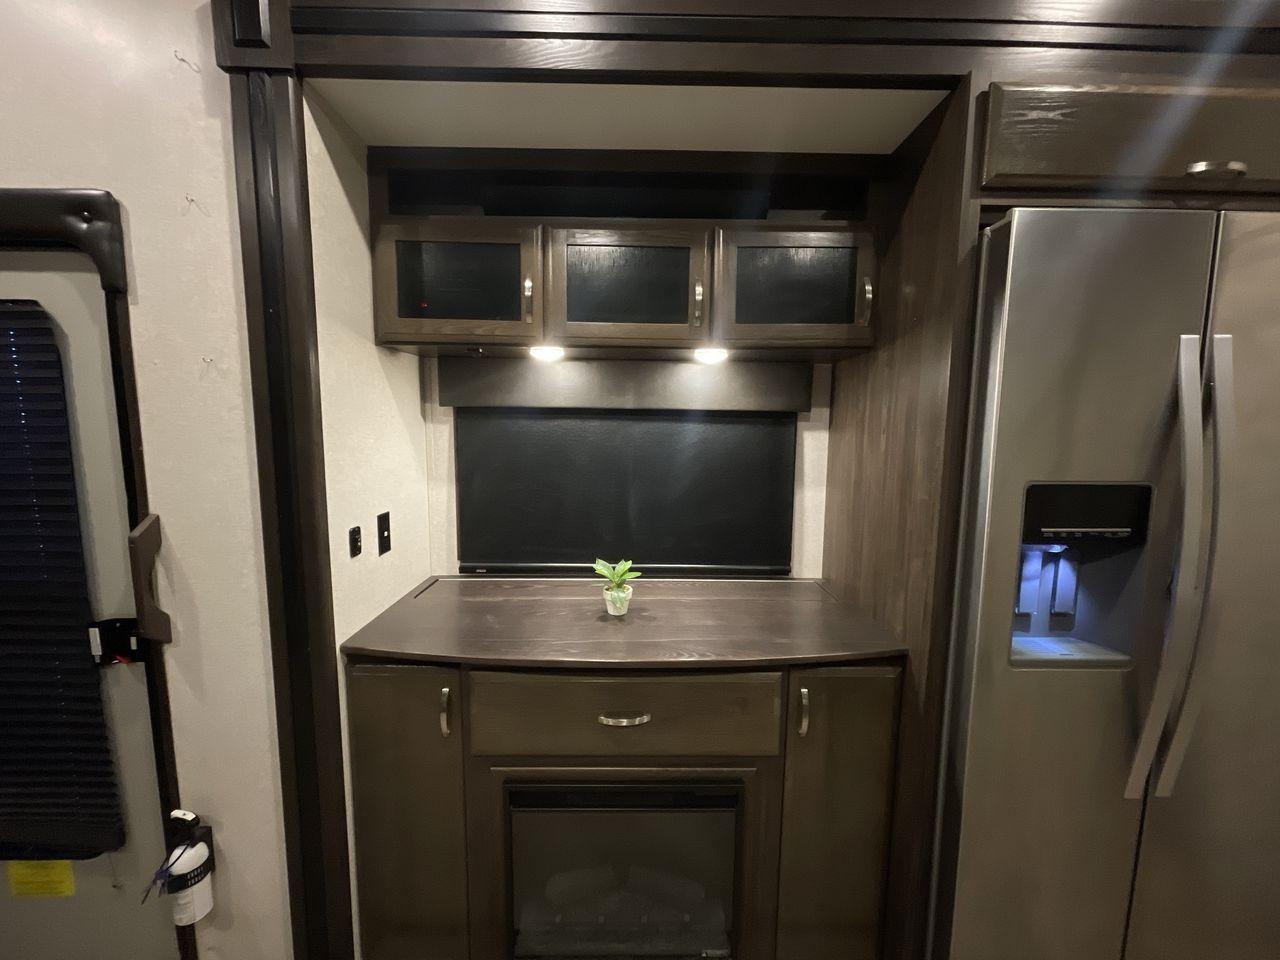 2018 GRAY JAYCO SEISMIC 4250 - (1UJCJSCV5J1) , Length: 44.92 ft. | Dry Weight: 15,570 lbs. | Gross Weight: 20,000 lbs. | Slides: 3 transmission, located at 4319 N Main St, Cleburne, TX, 76033, (817) 678-5133, 32.385960, -97.391212 - Set out to the great outdoors in this 2018 Jayco Seismic 4250 and enjoy all its amenities! This toy hauler measures just a bit under 45 ft. in length and 13.32 ft. in height, providing great space and comfort. It has a dry weight of 15,570 lbs. and a GVWR of 20,000 lbs. It also comes with automatic - Photo #24